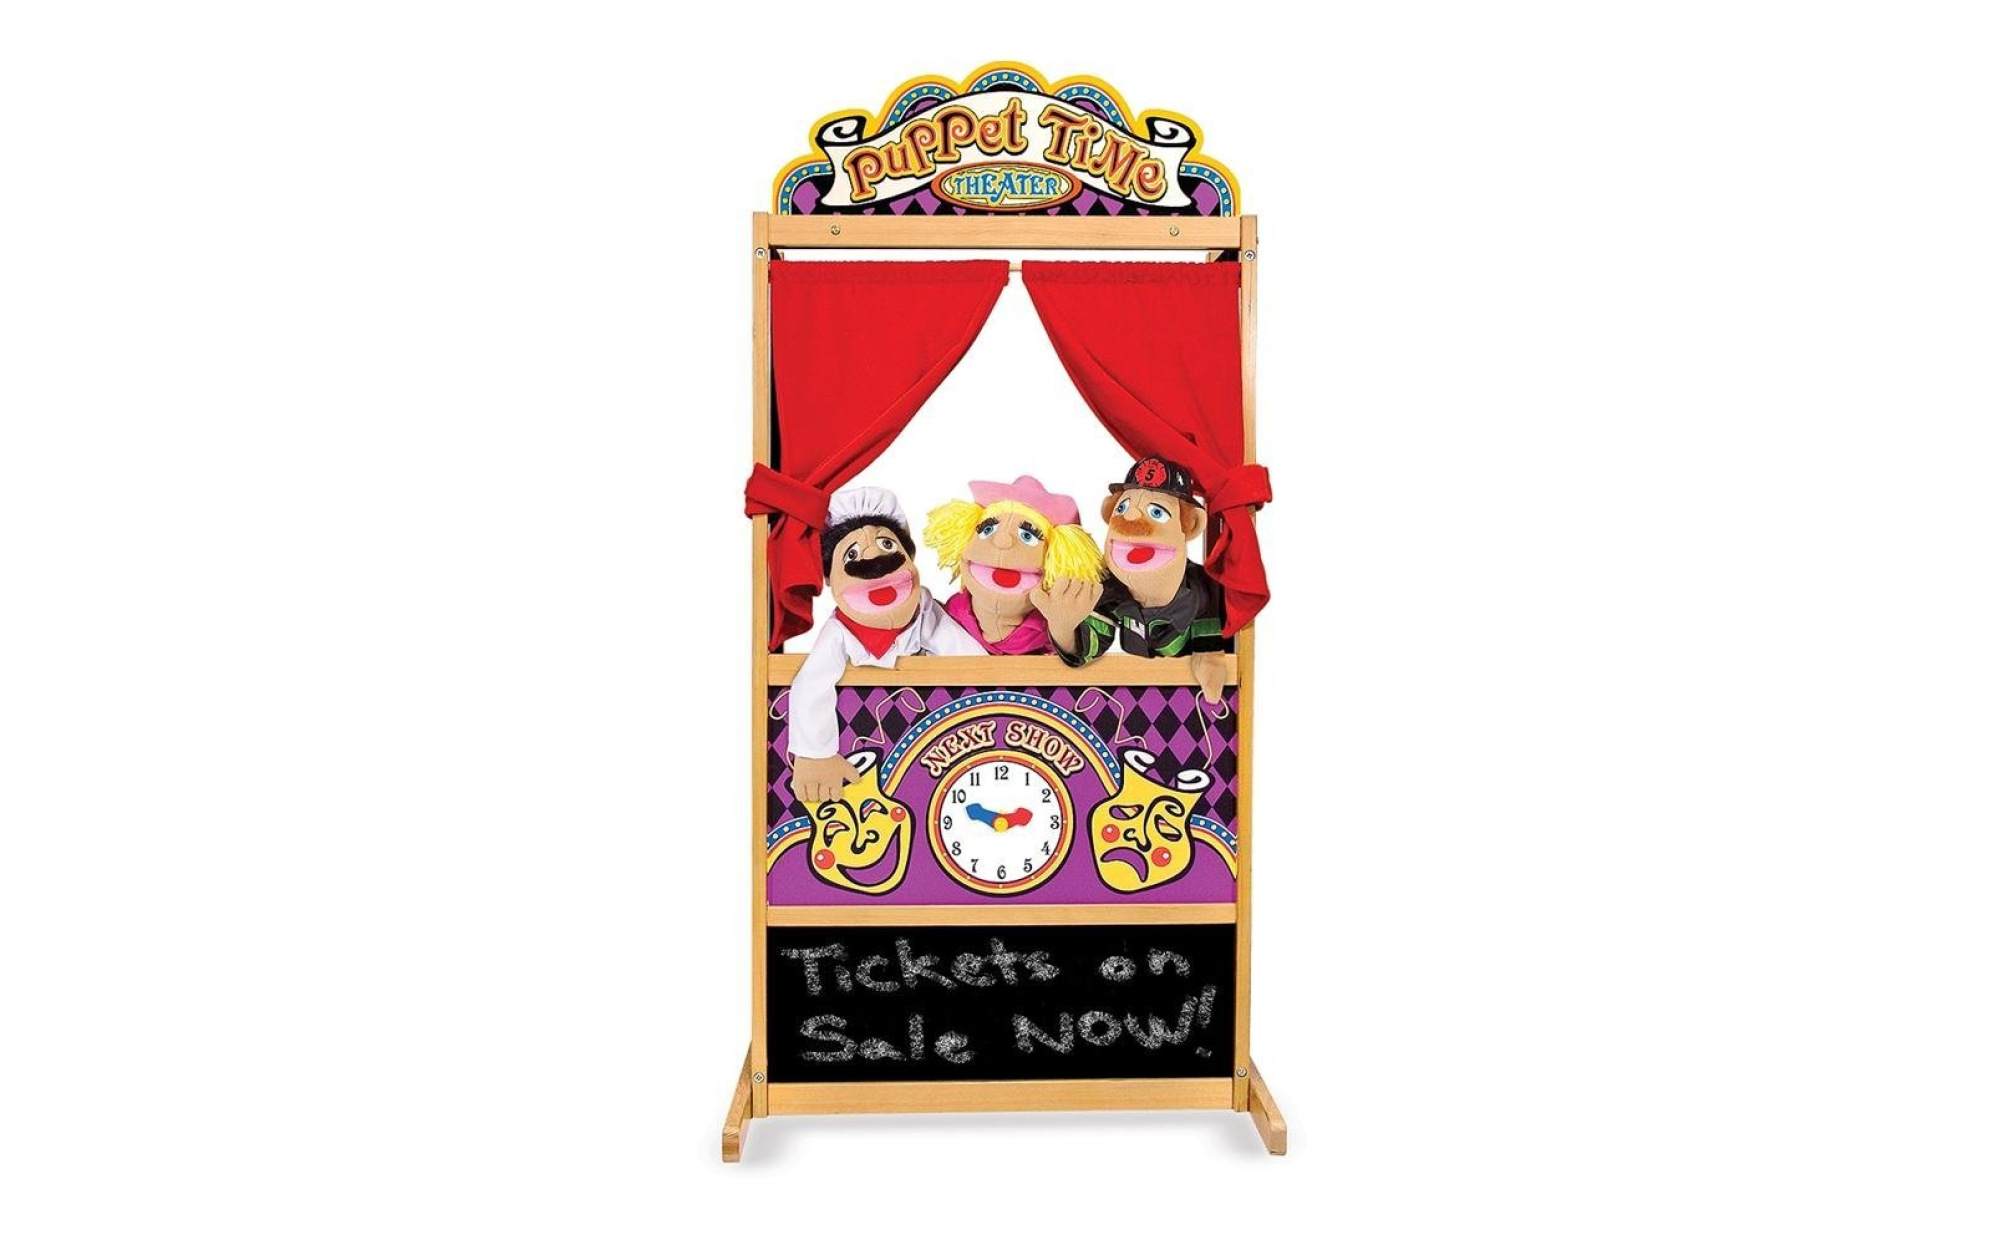 Puppet Theater – Puppets